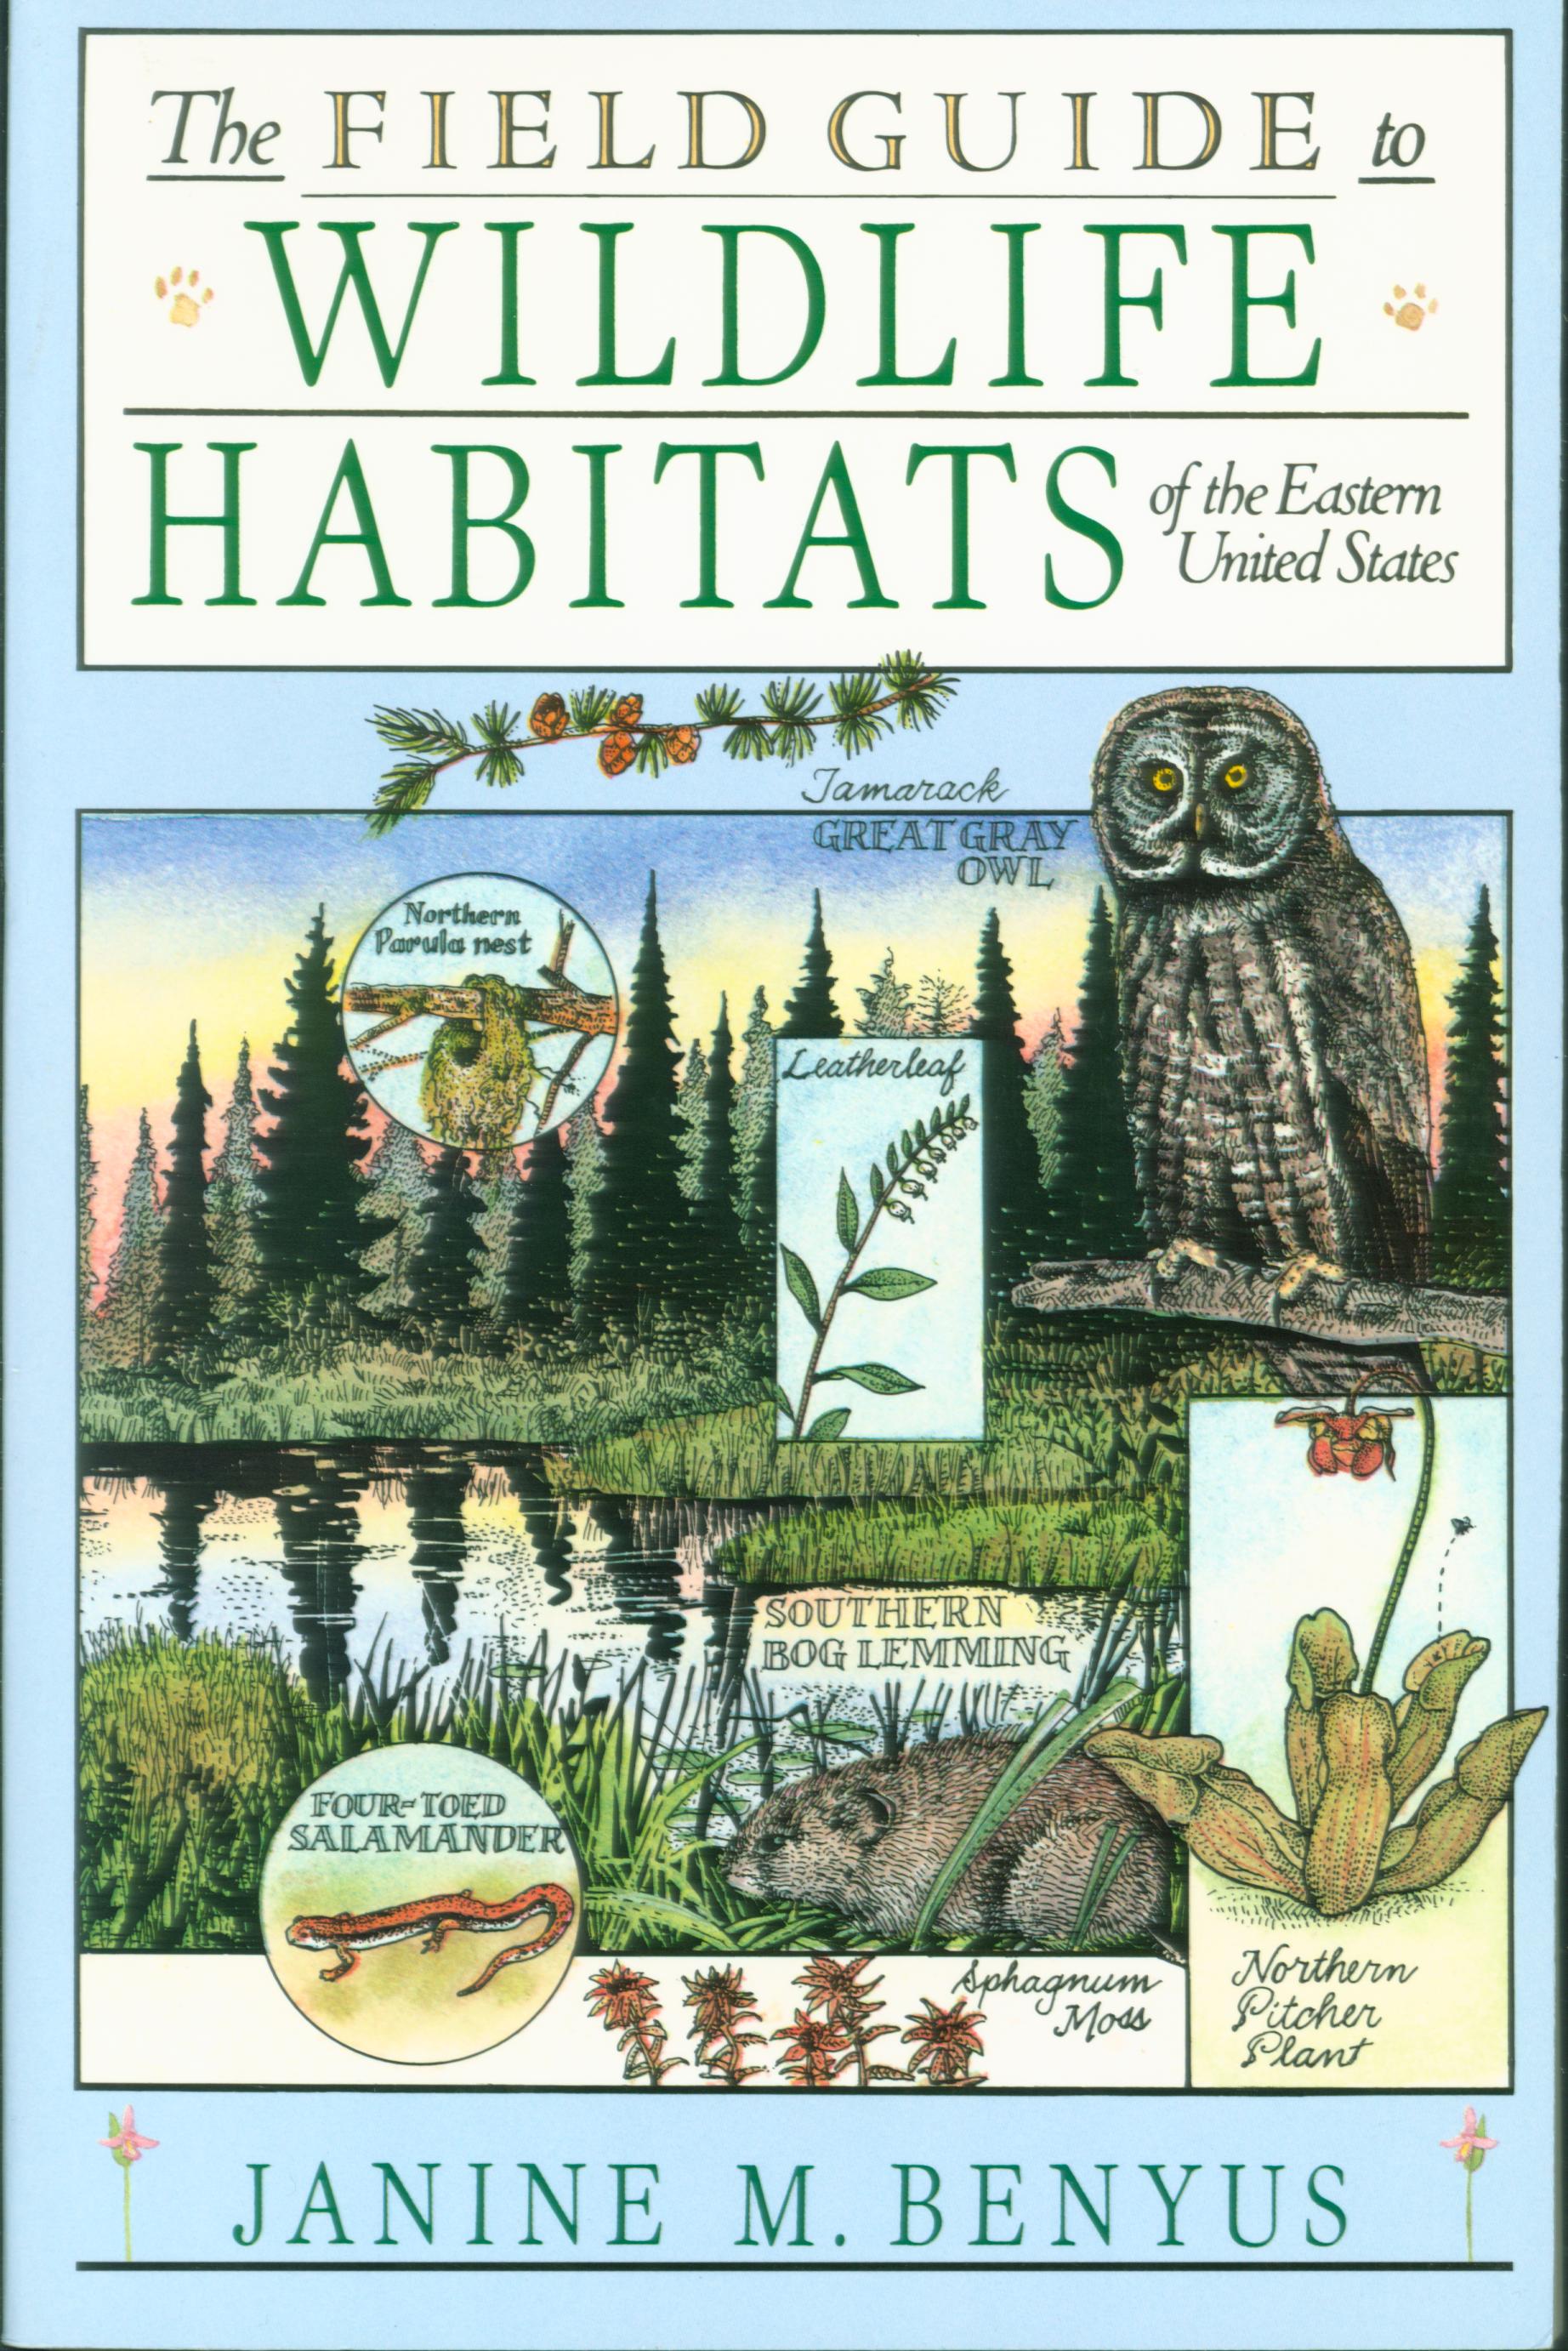 THE FIELD GUIDE TO WILDLIFE HABITATS OF THE EASTERN UNITED STATES.